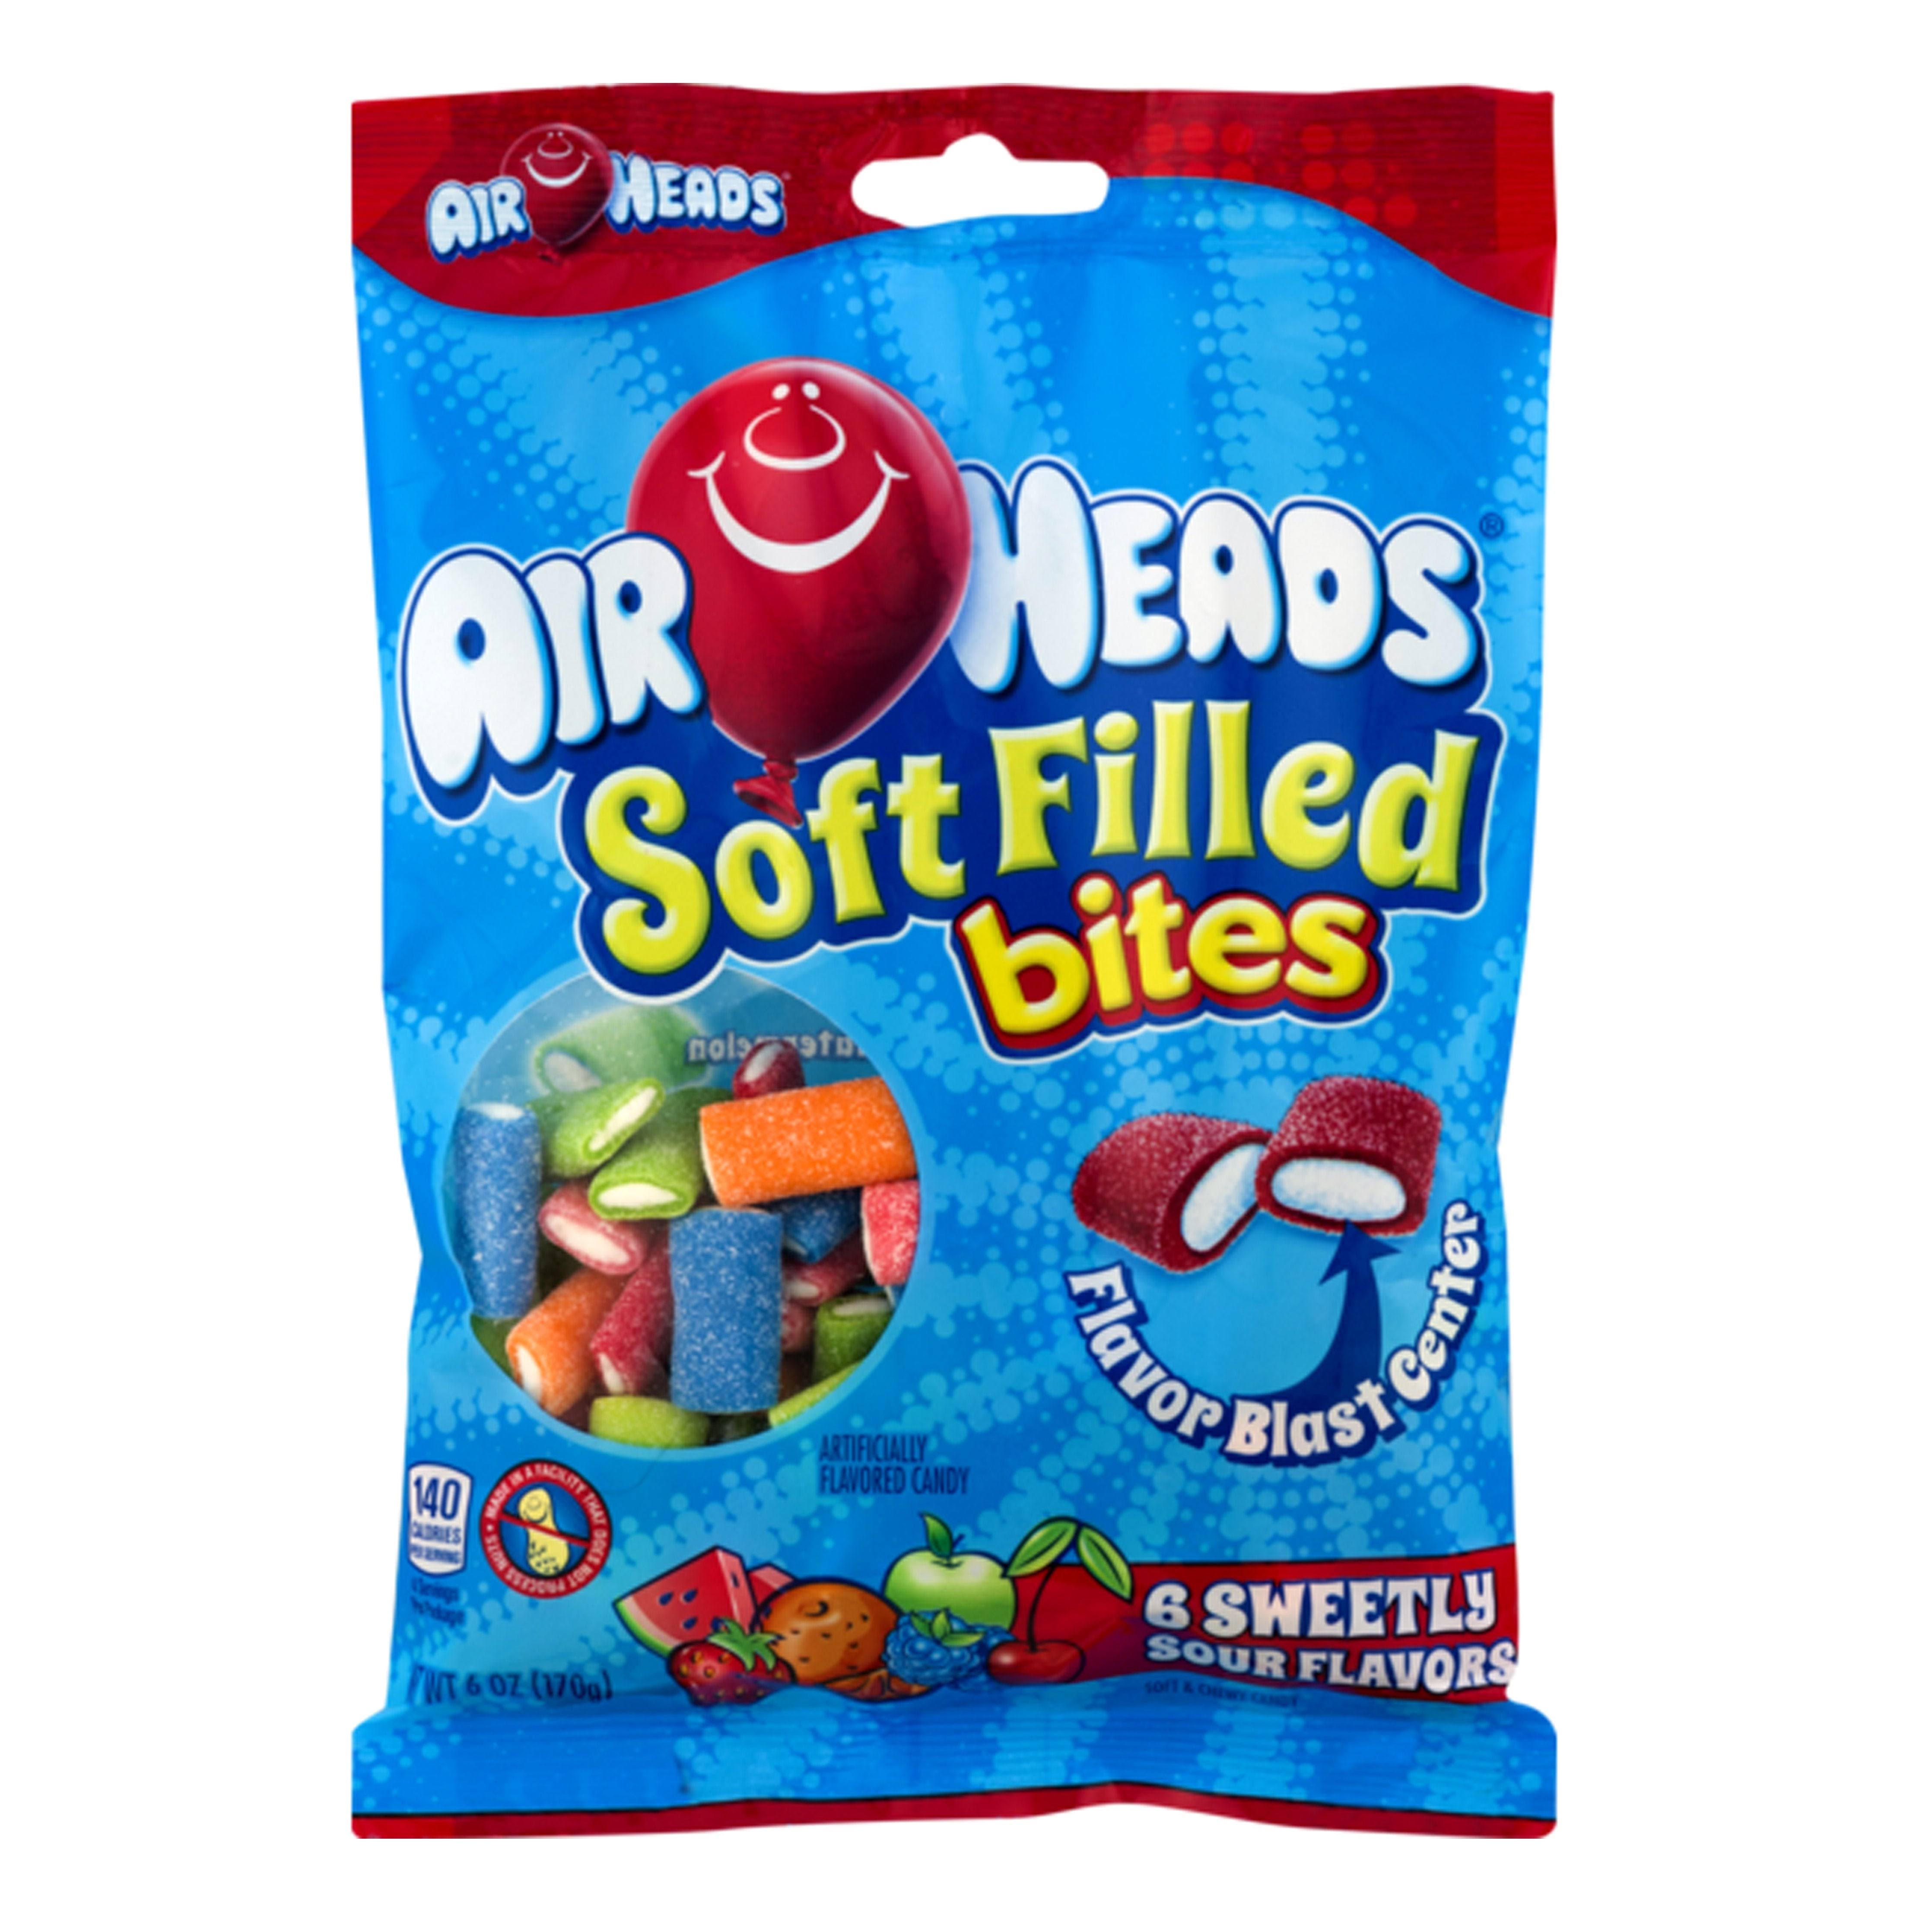 Air Heads Soft Filled Bites - 170g, 6 Sweetly Sour Flavors